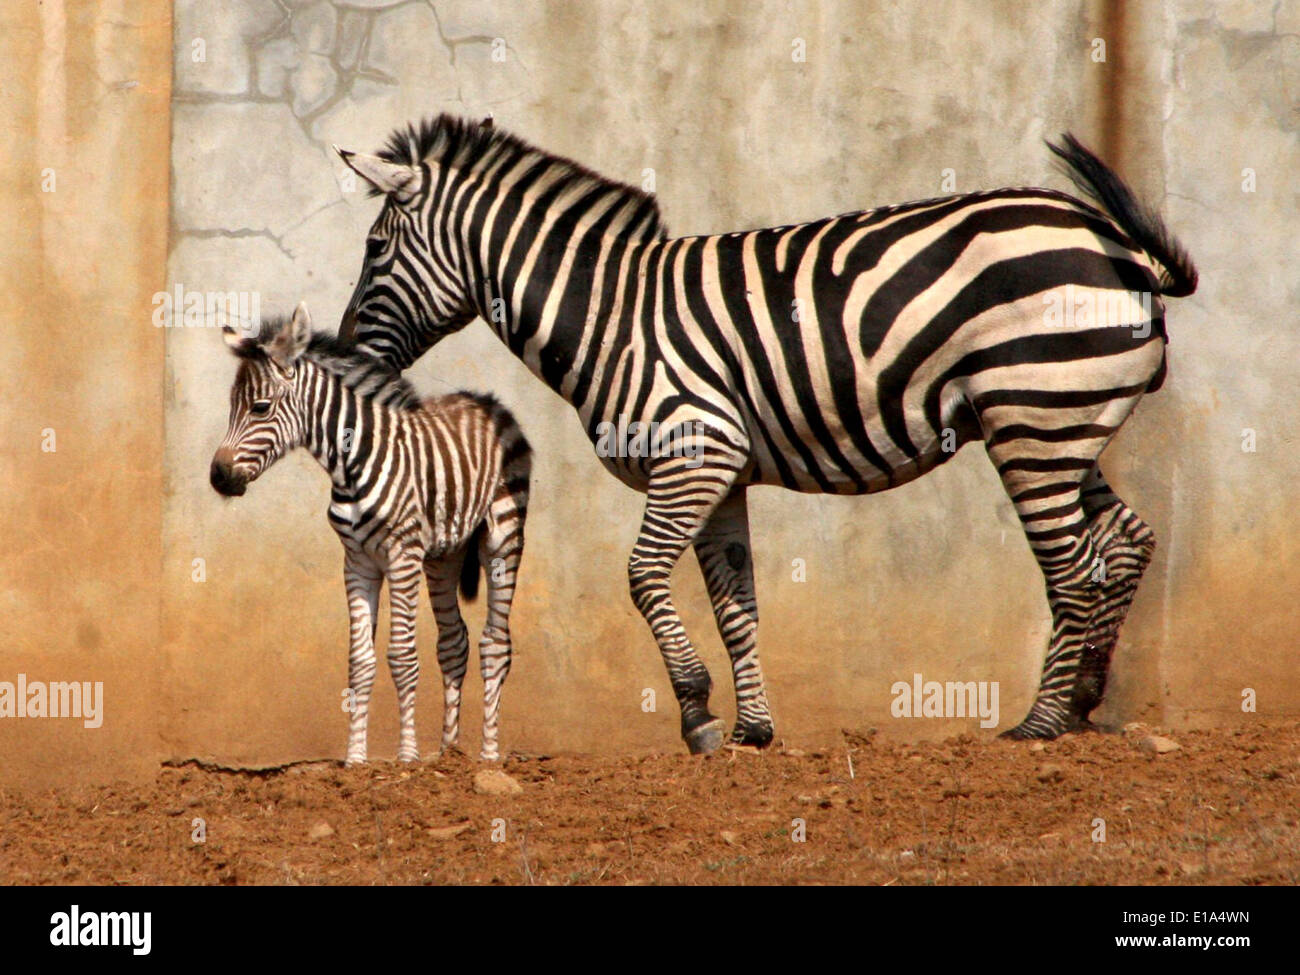 A zebra and her foal at a wildlife park. Stock Photo